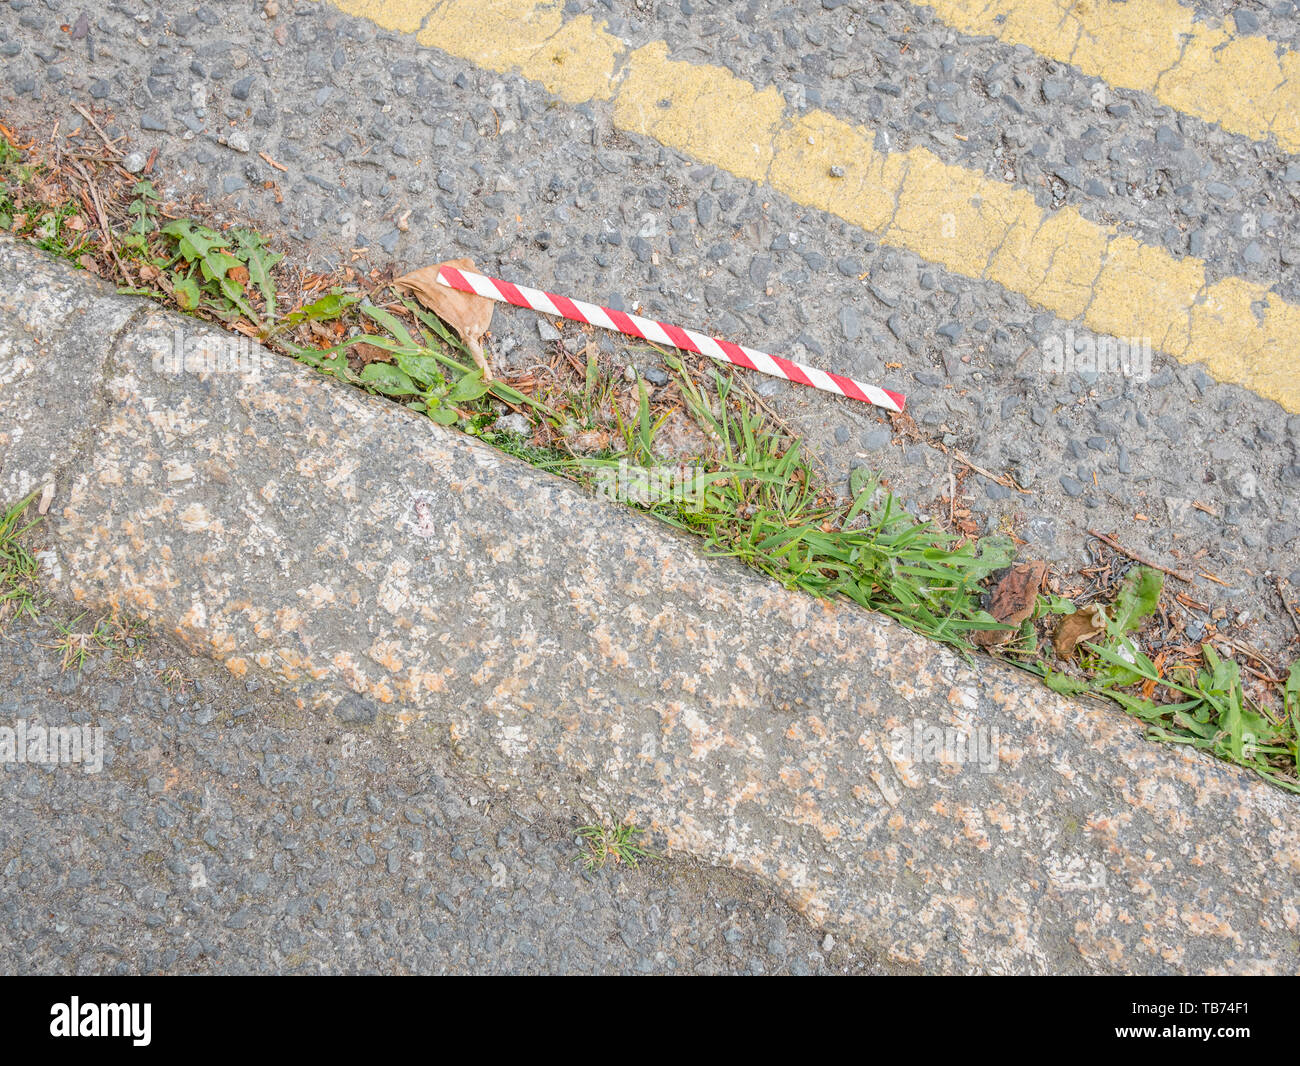 Discarded paper straw littering urban road curbside. Paper straw litter replacing plastic straw litter as the new urban rubbish problem. Stock Photo